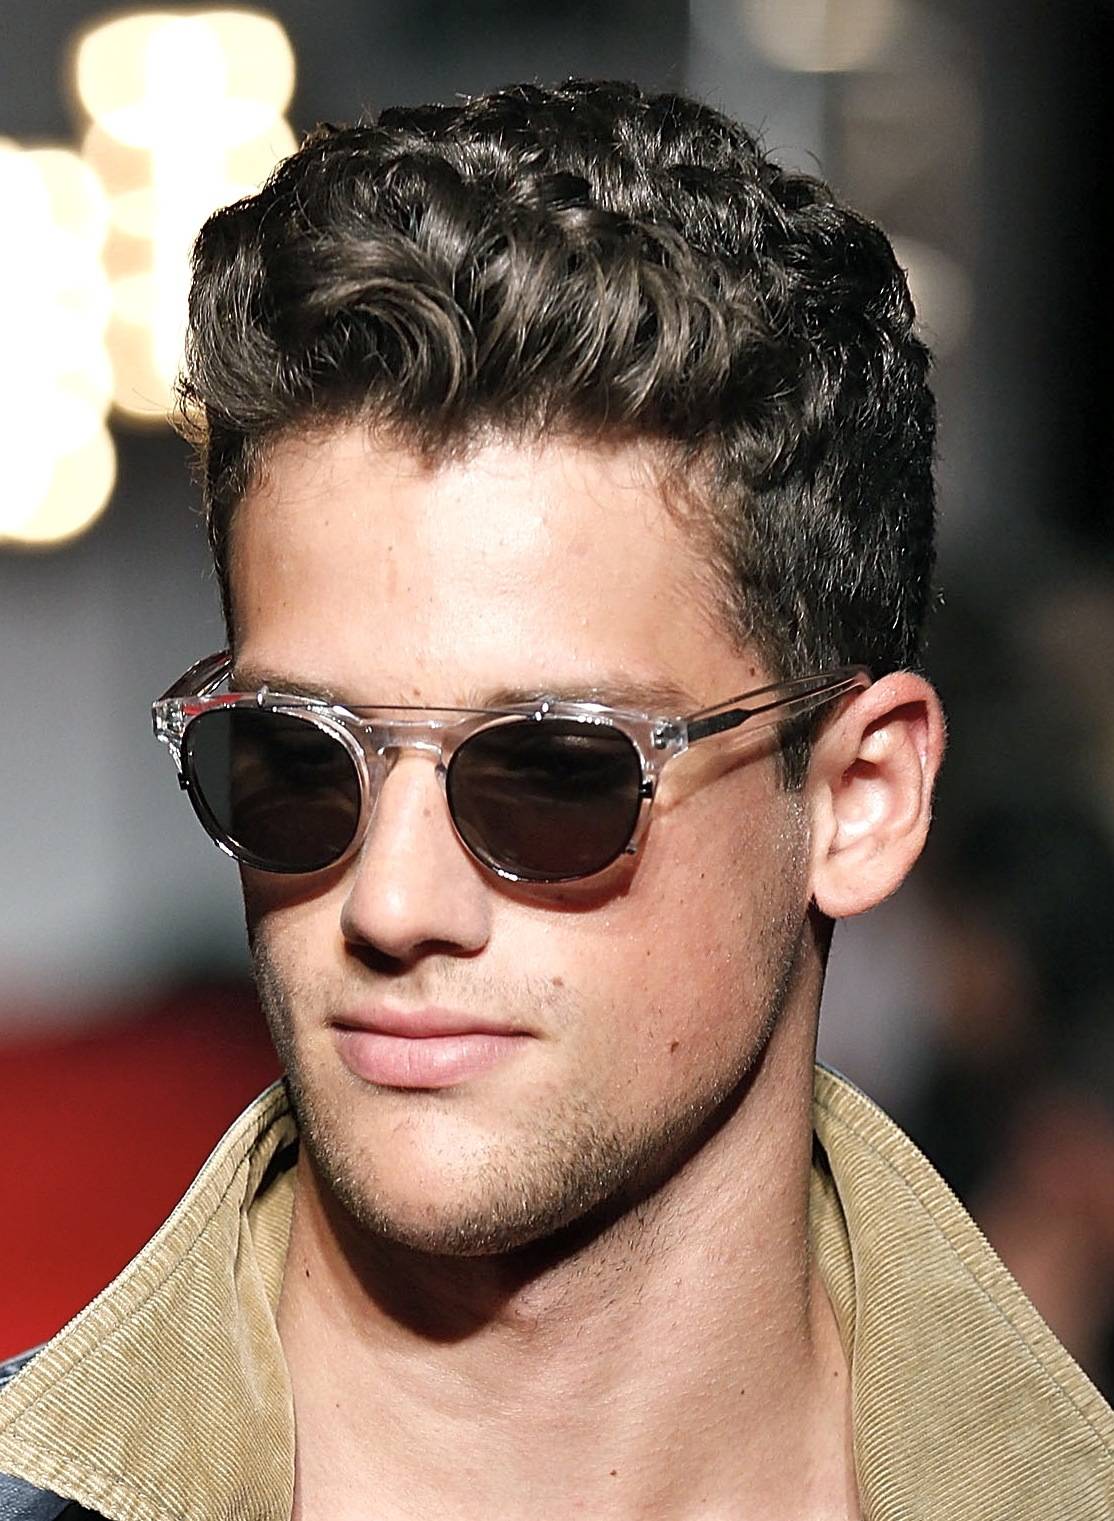 20 Cool Curly Hairstyles For Men Feed Inspiration